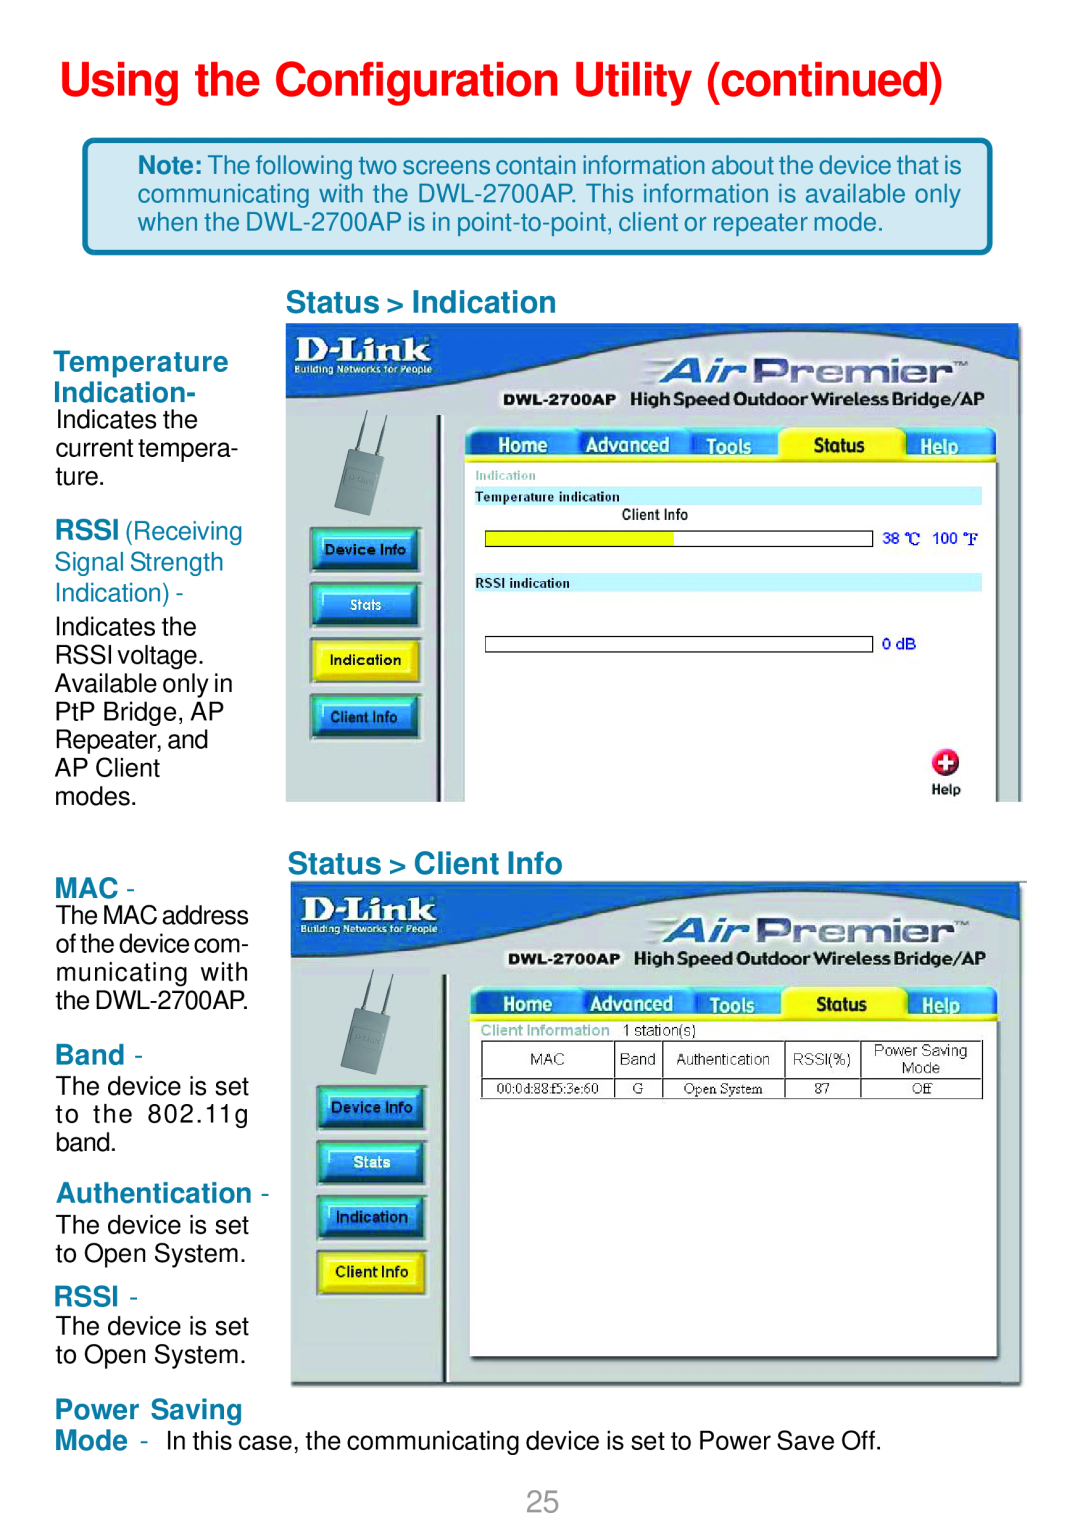 D-Link DWL-2700AP Status Indication, Status Client Info, Temperature Indication, Authentication, Rssi, Power Saving, Band 